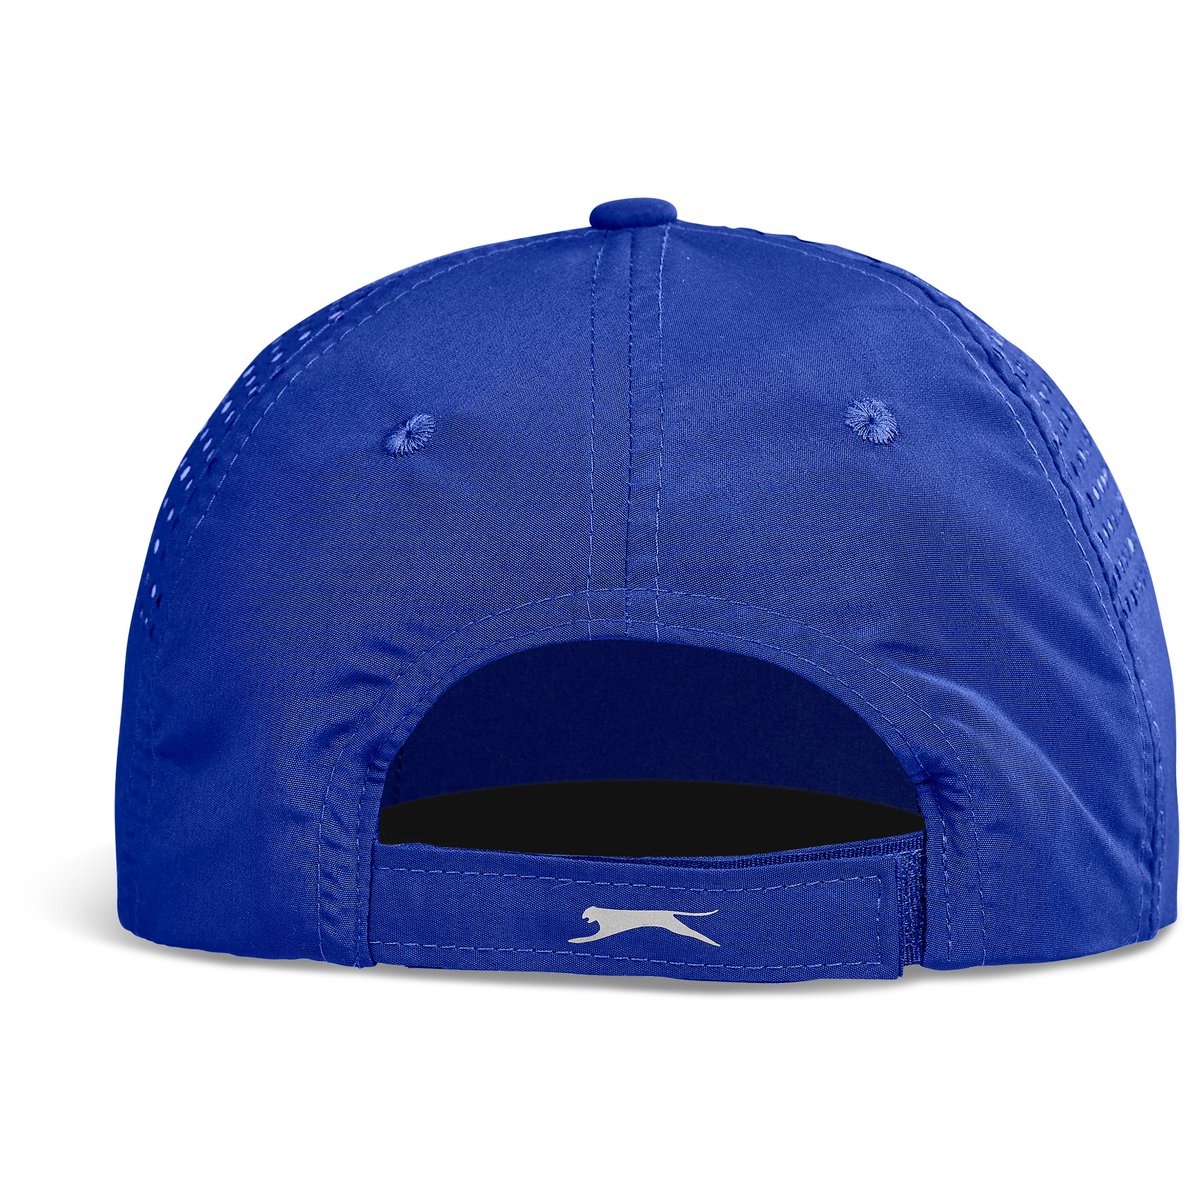 Relay Cap – 6 Panel

R94.99

60g/m2
100% polyester peachskin
6-panel structured peak
6 rows of stitching
4 embroidered eyelets
Laser cut side panels
Adjustable velcro closure
Reflective Slazenger logo on the velcro closure
Polyester: Extremely durable & crease-resistant.